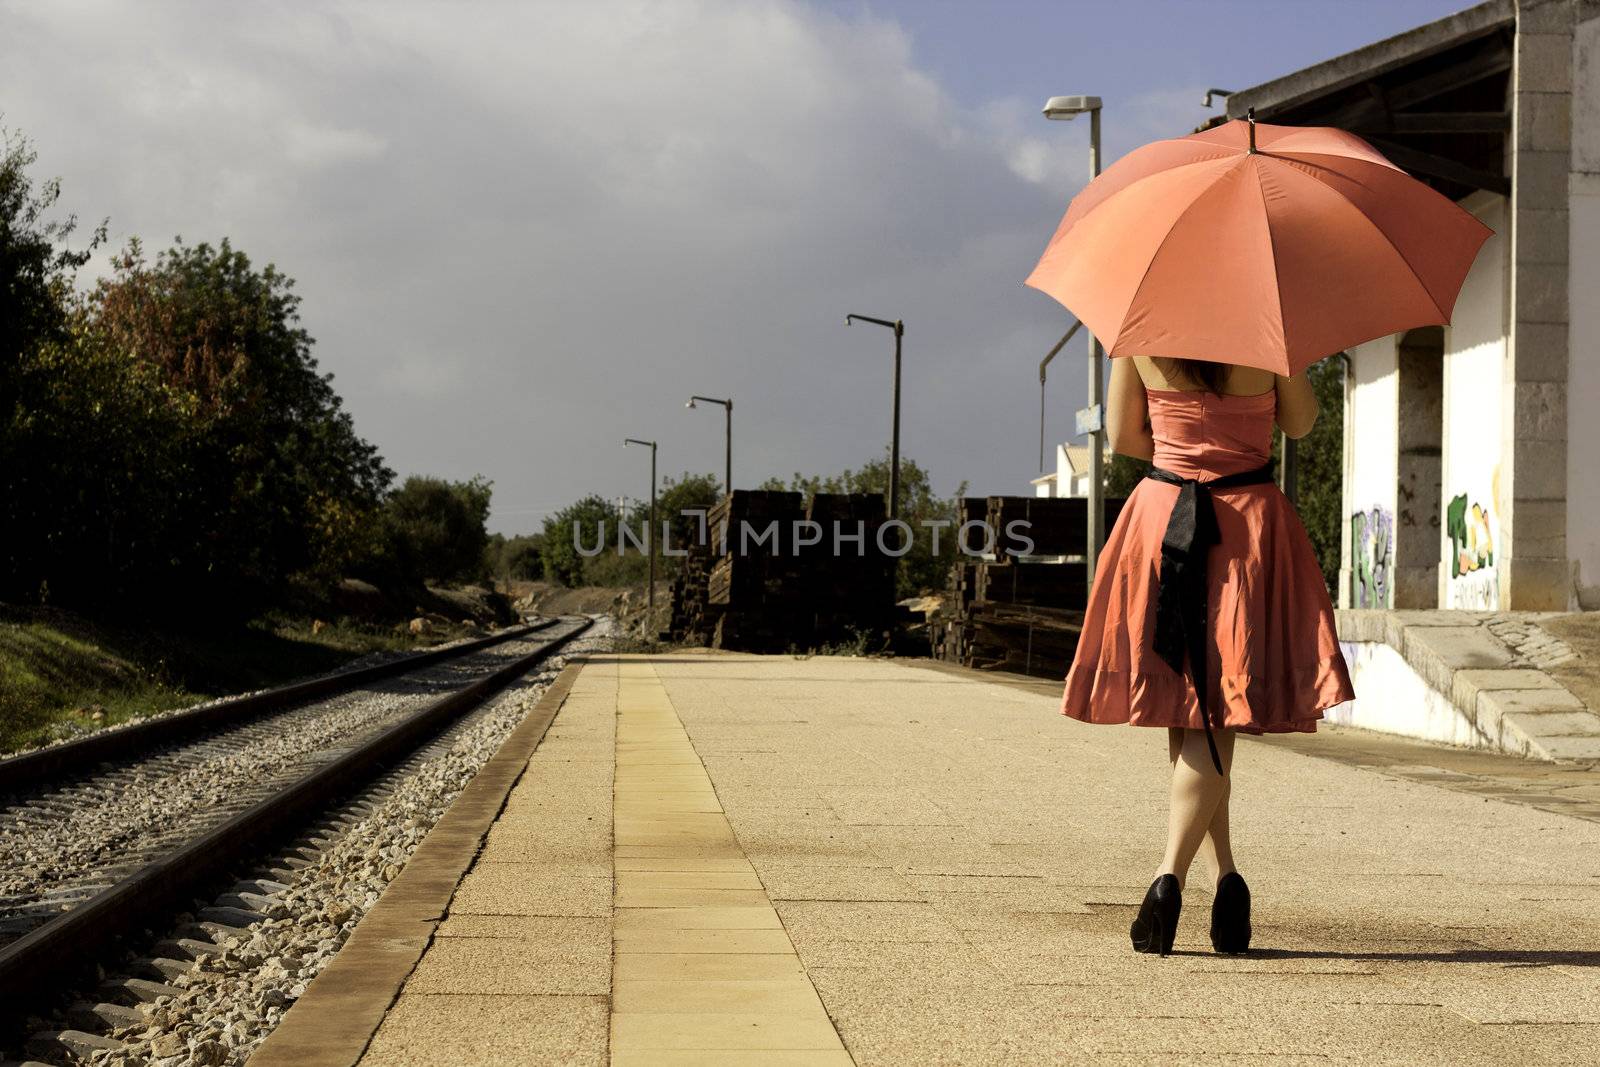 View of a beautiful woman with red dress and umbrella on a train station.